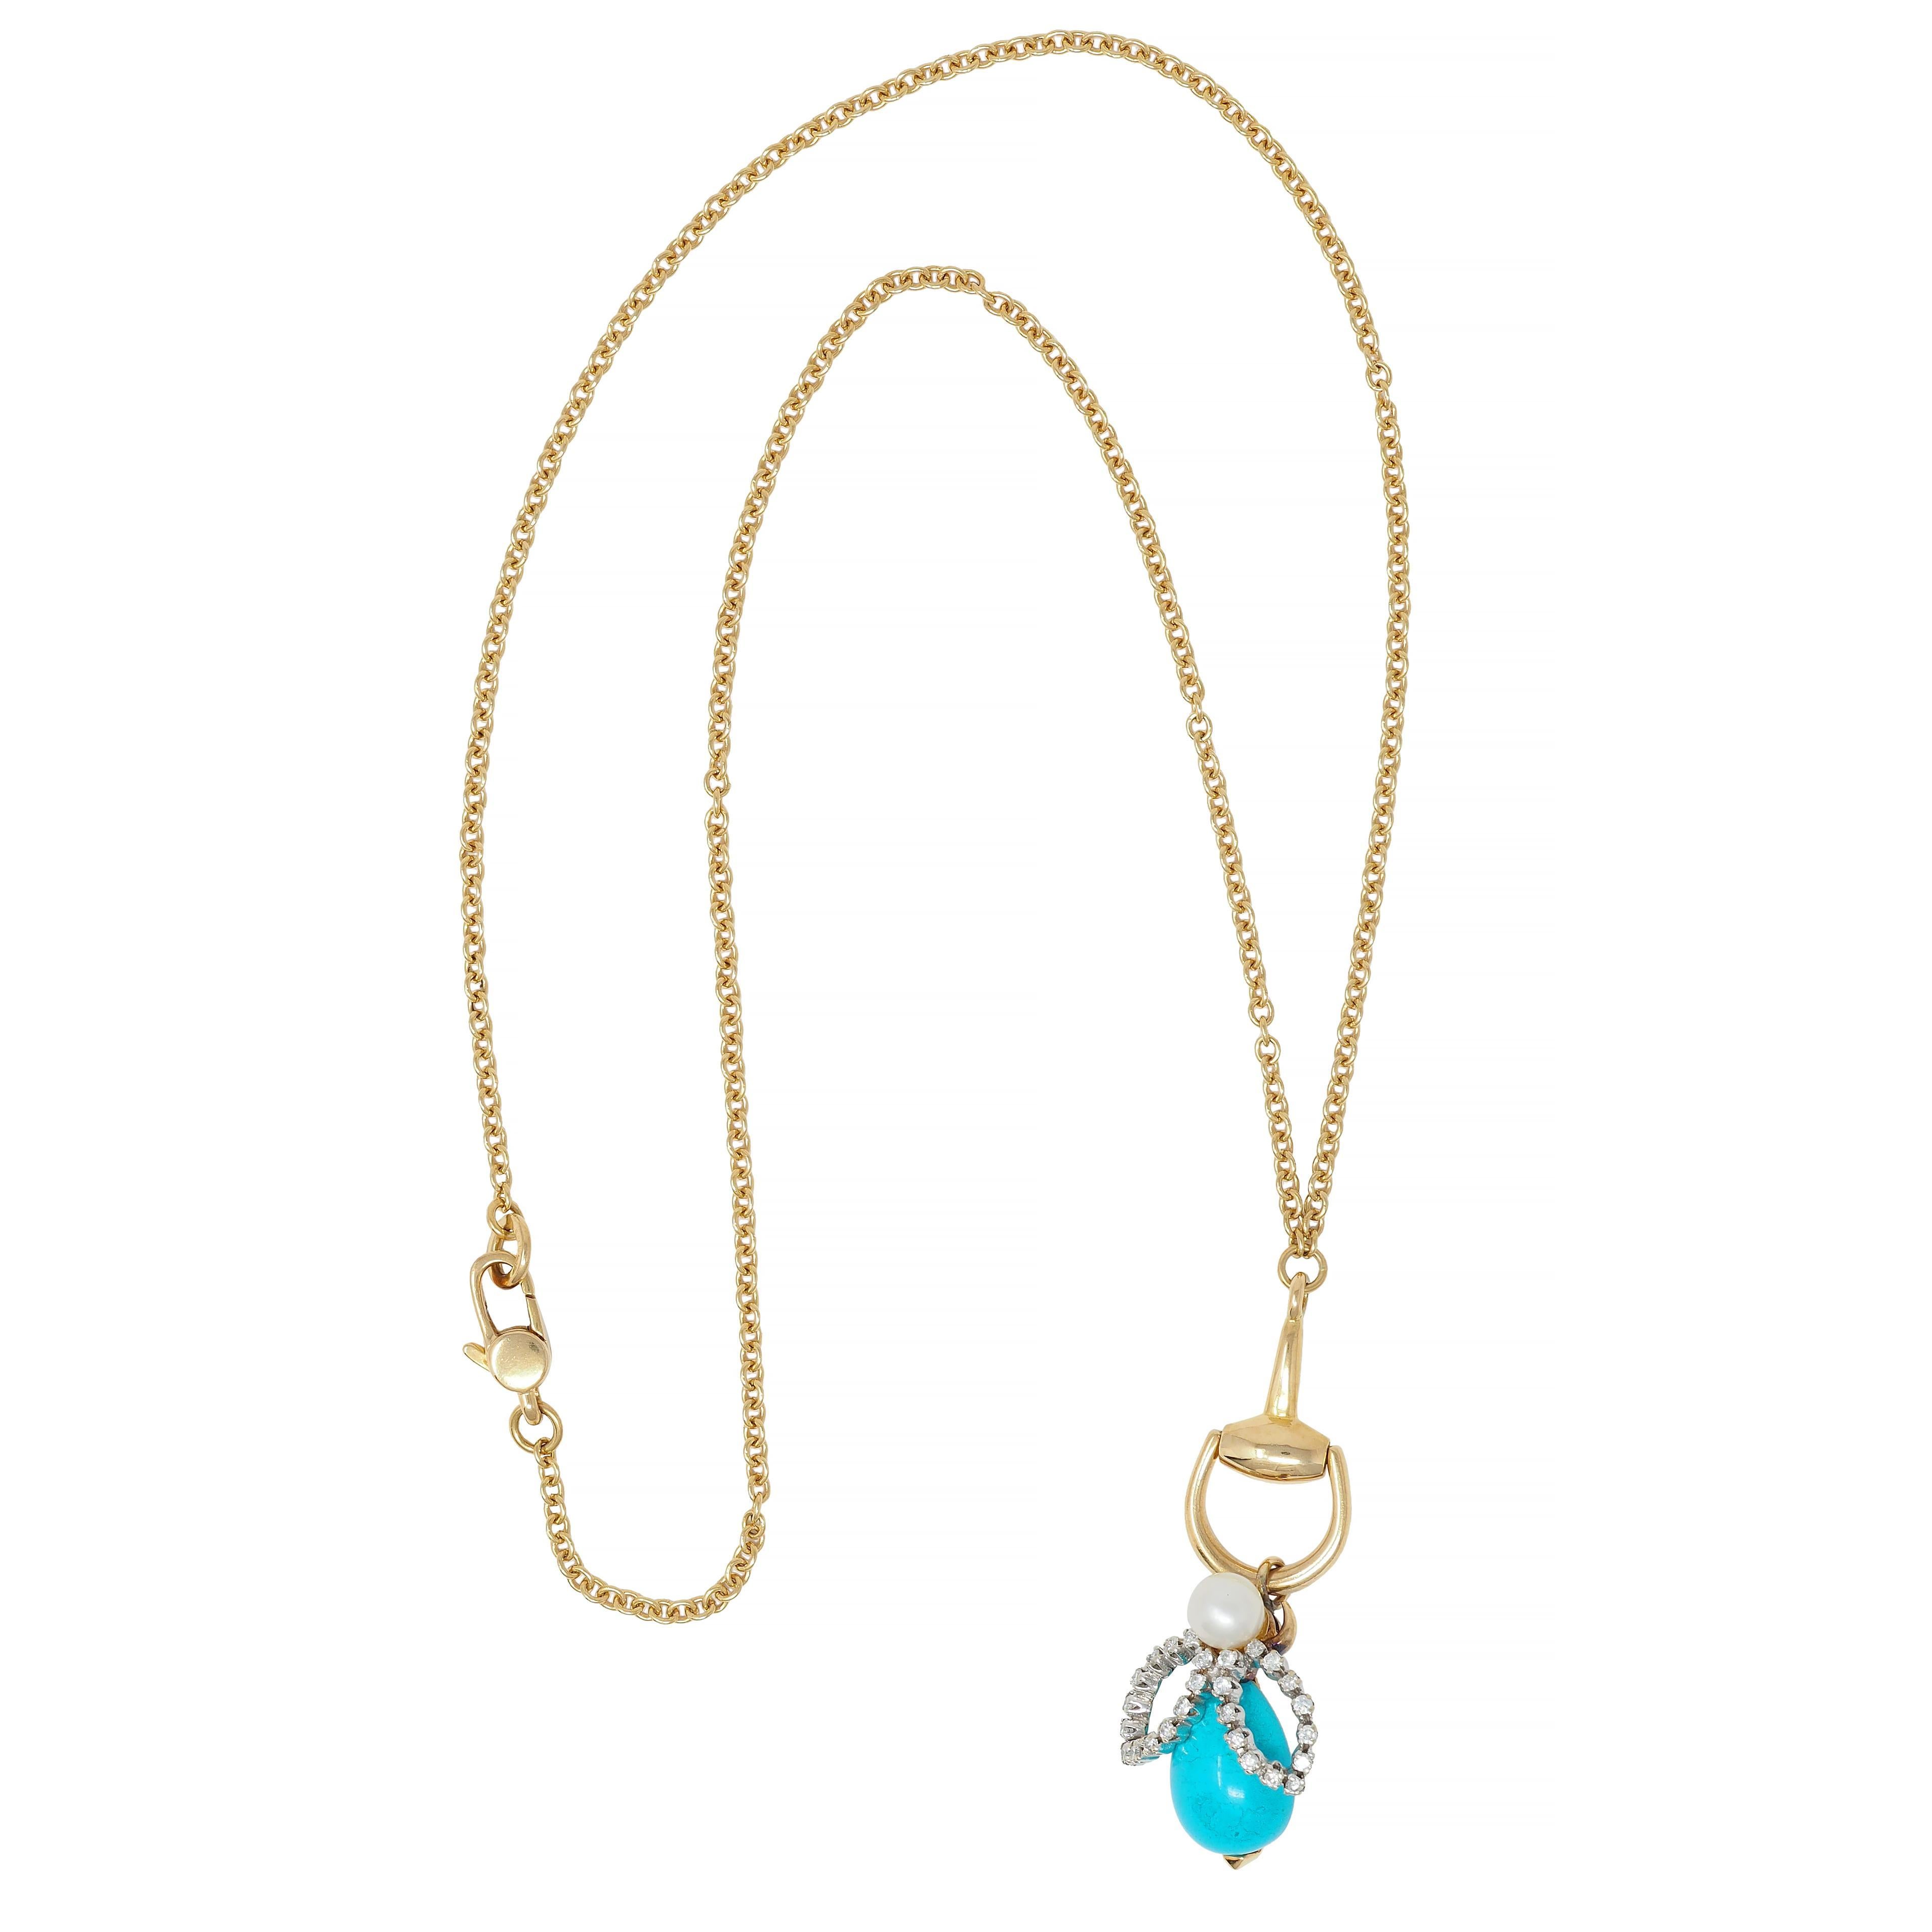 Designed as a 2.0 mm cable link chain centering a gold hinged horsebit motif pendant
Suspending an articulated and stylized bee motif drop with a turquoise body
Opaque robins egg blue and pear shaped - measuring 9.0 x 10.0 mm 
With platinum wings